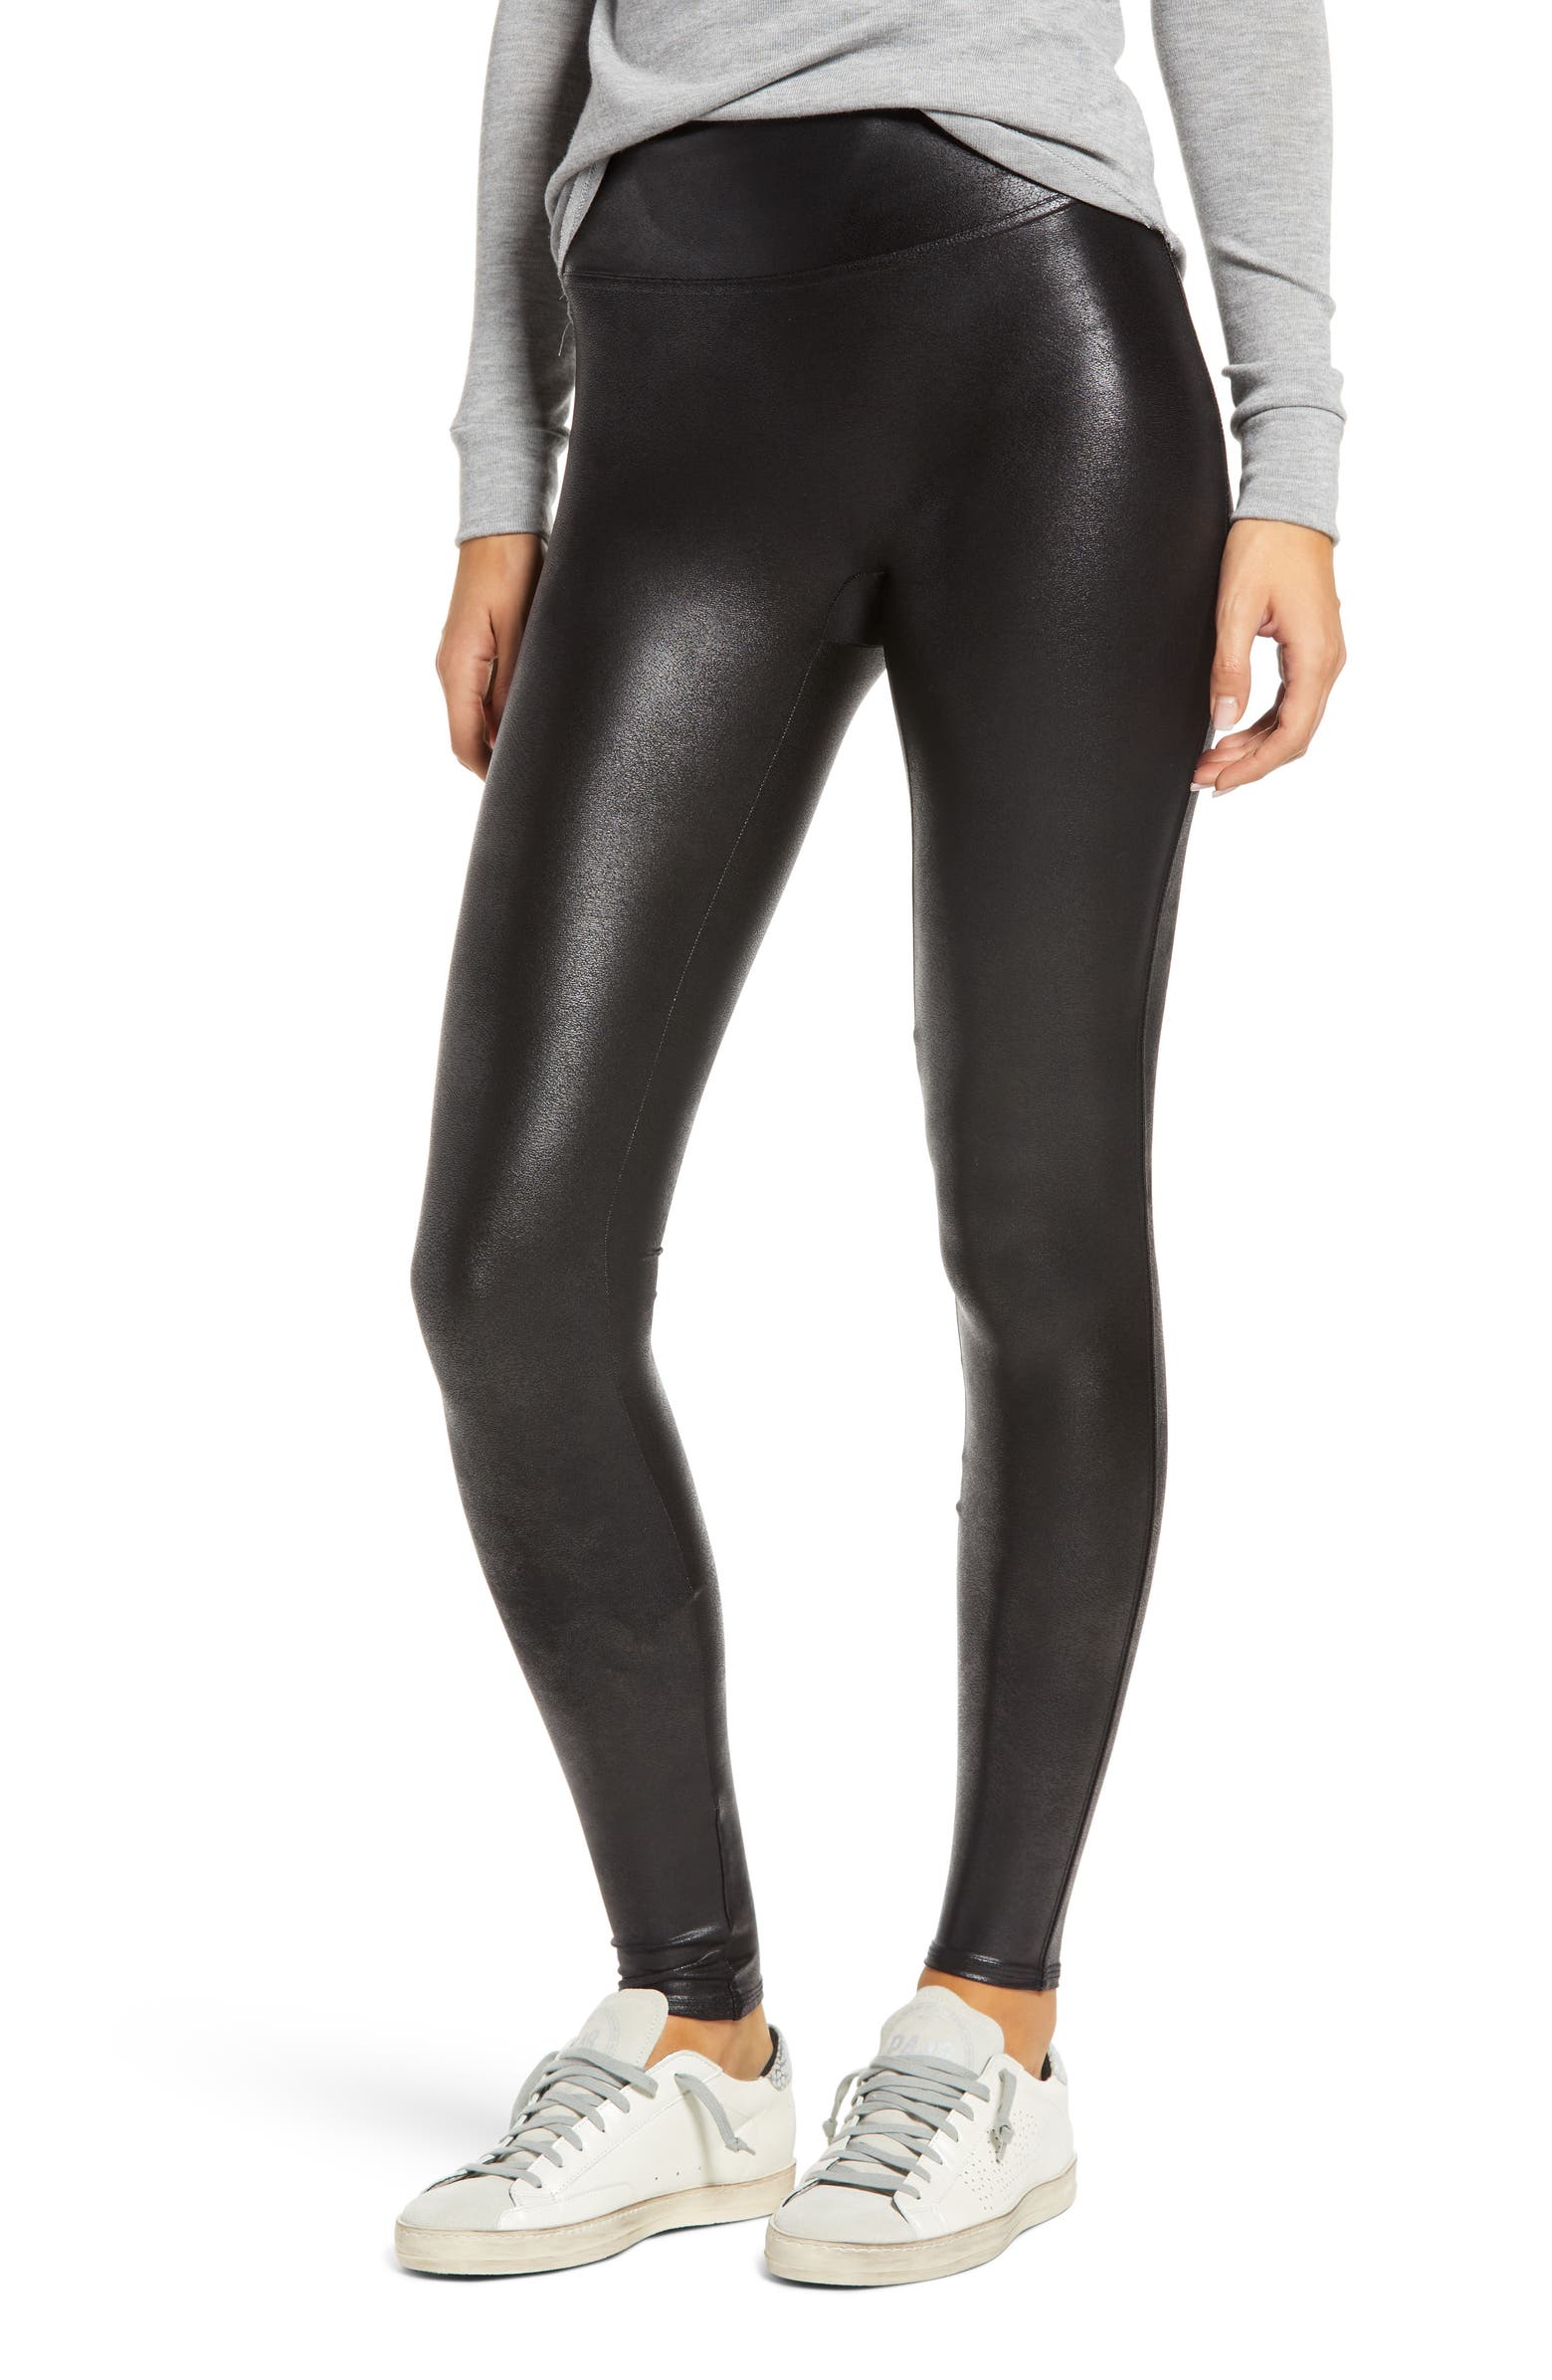 Spanx Leggings Review Uk Basketball  International Society of Precision  Agriculture